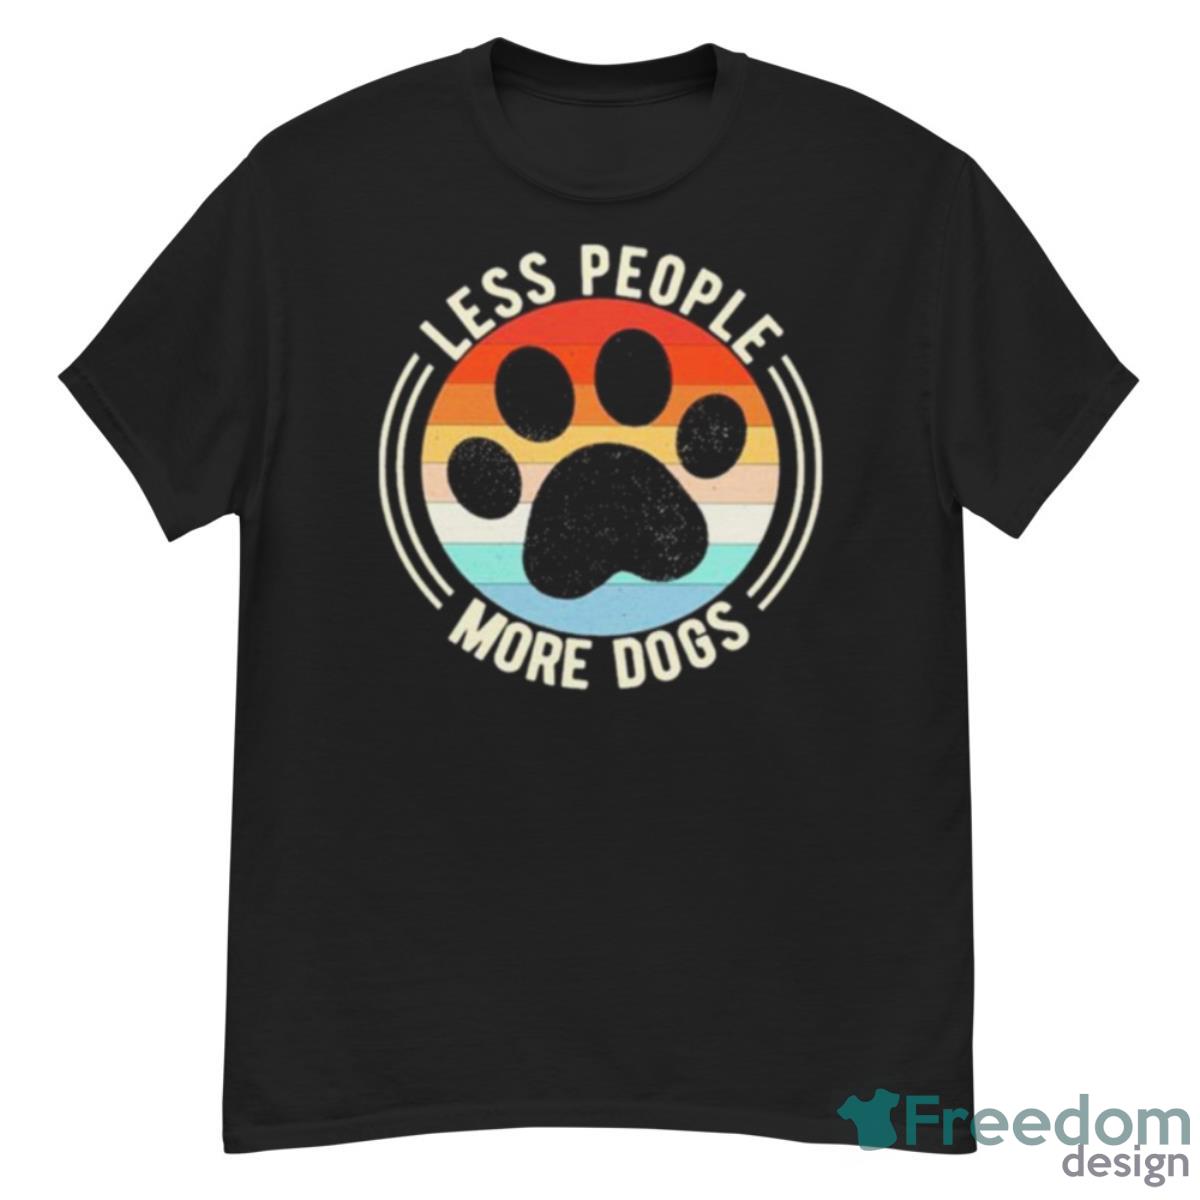 Less People More Dogs Feet Vintage Shirt - G500 Men’s Classic T-Shirt